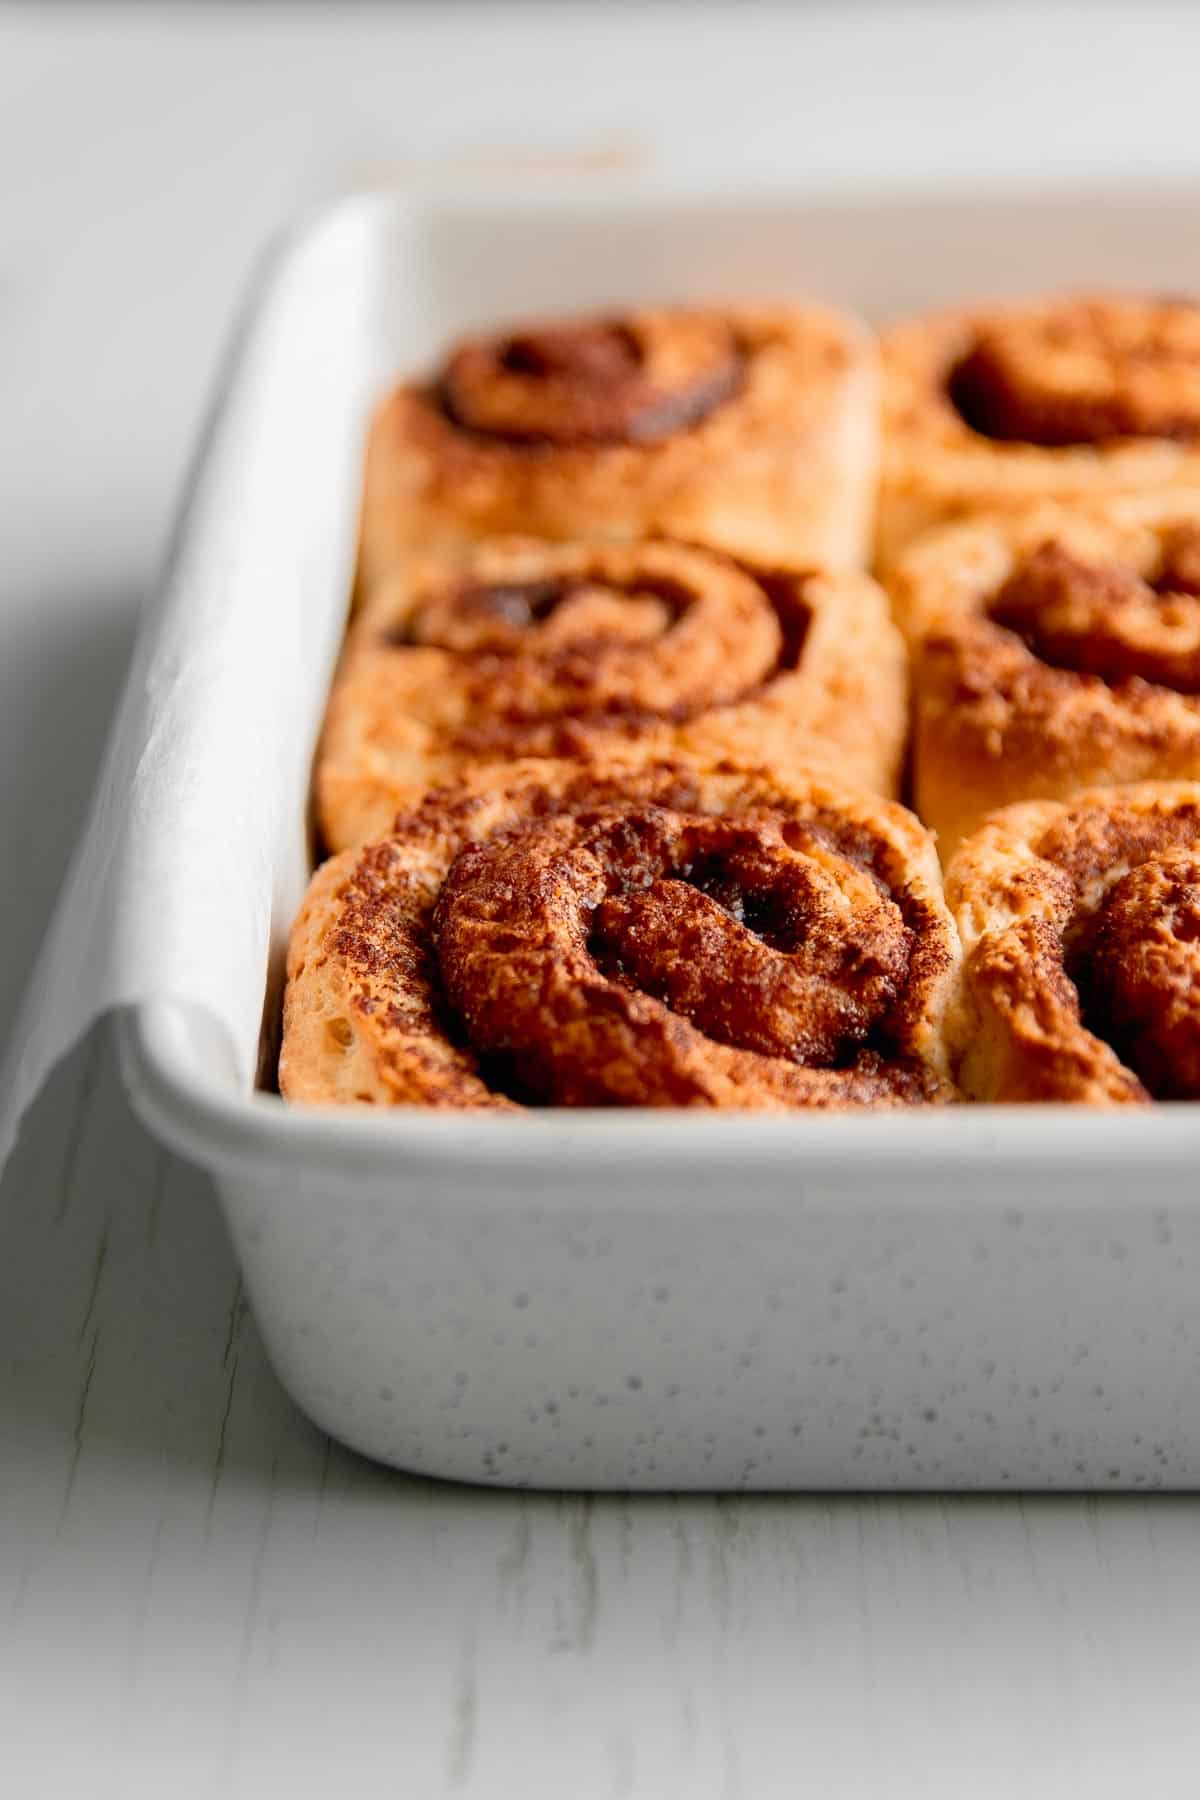 Golden brown baked rolls in a square pan.